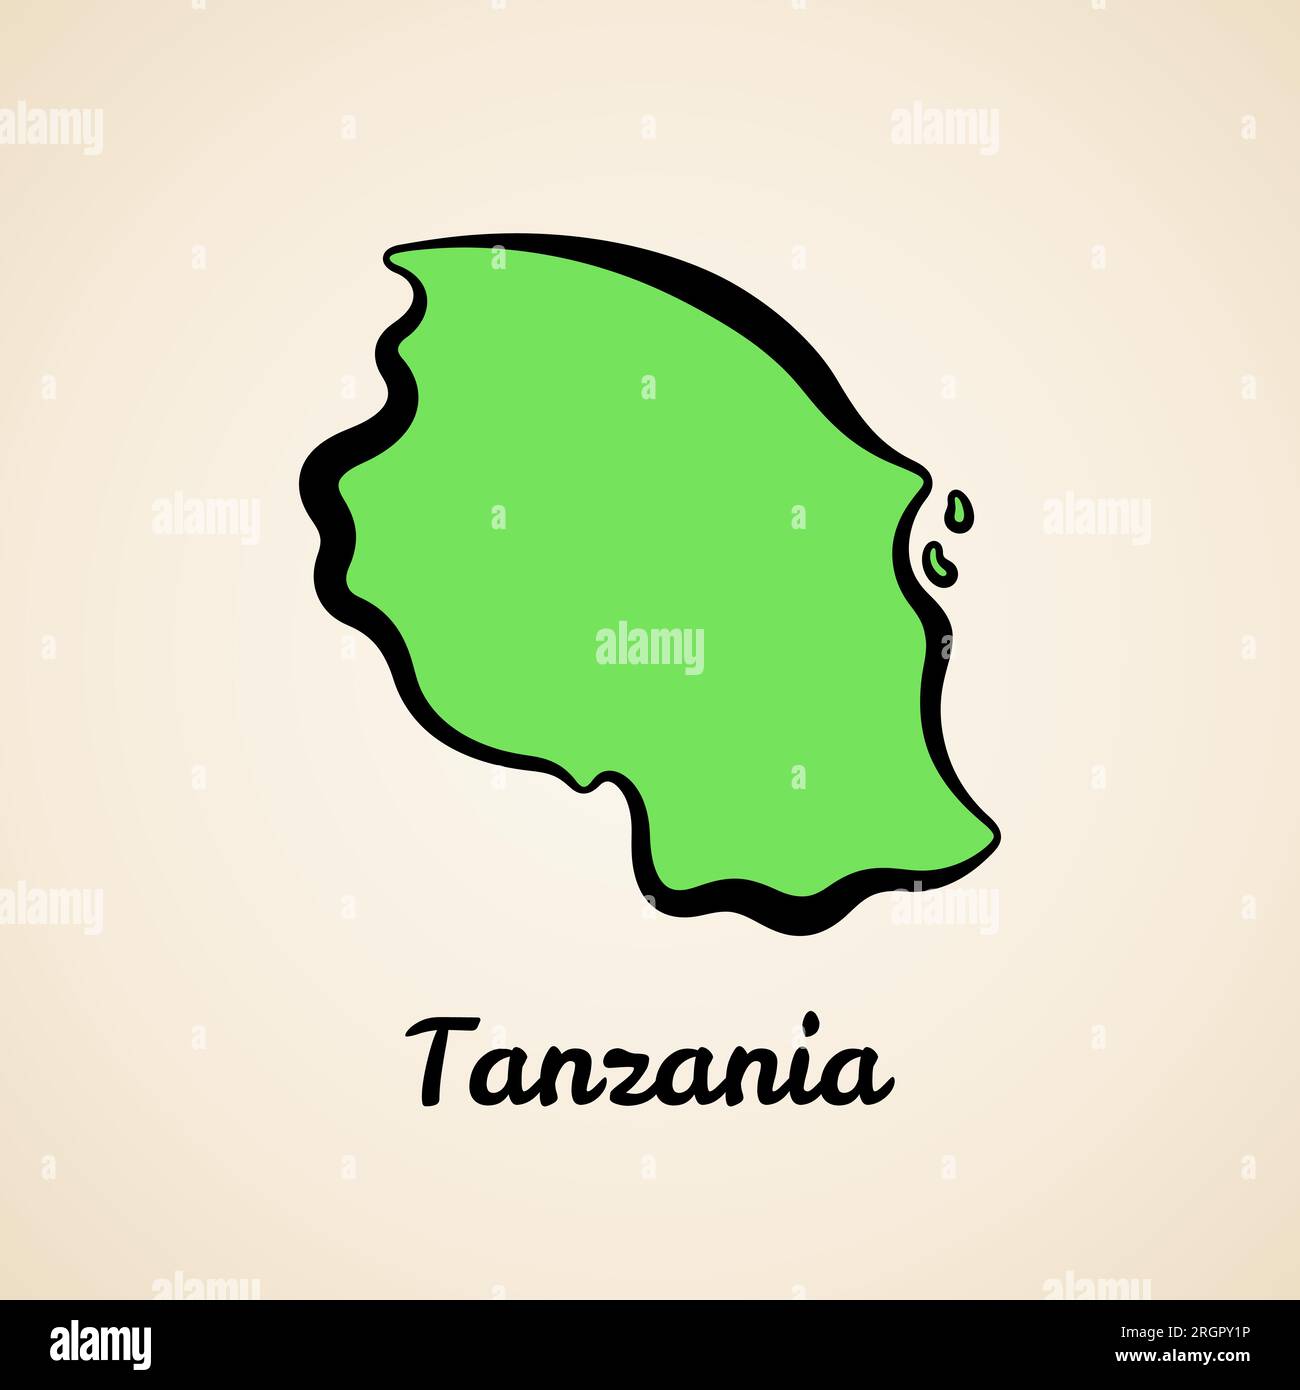 Green simplified map of Tanzania with black outline. Stock Vector